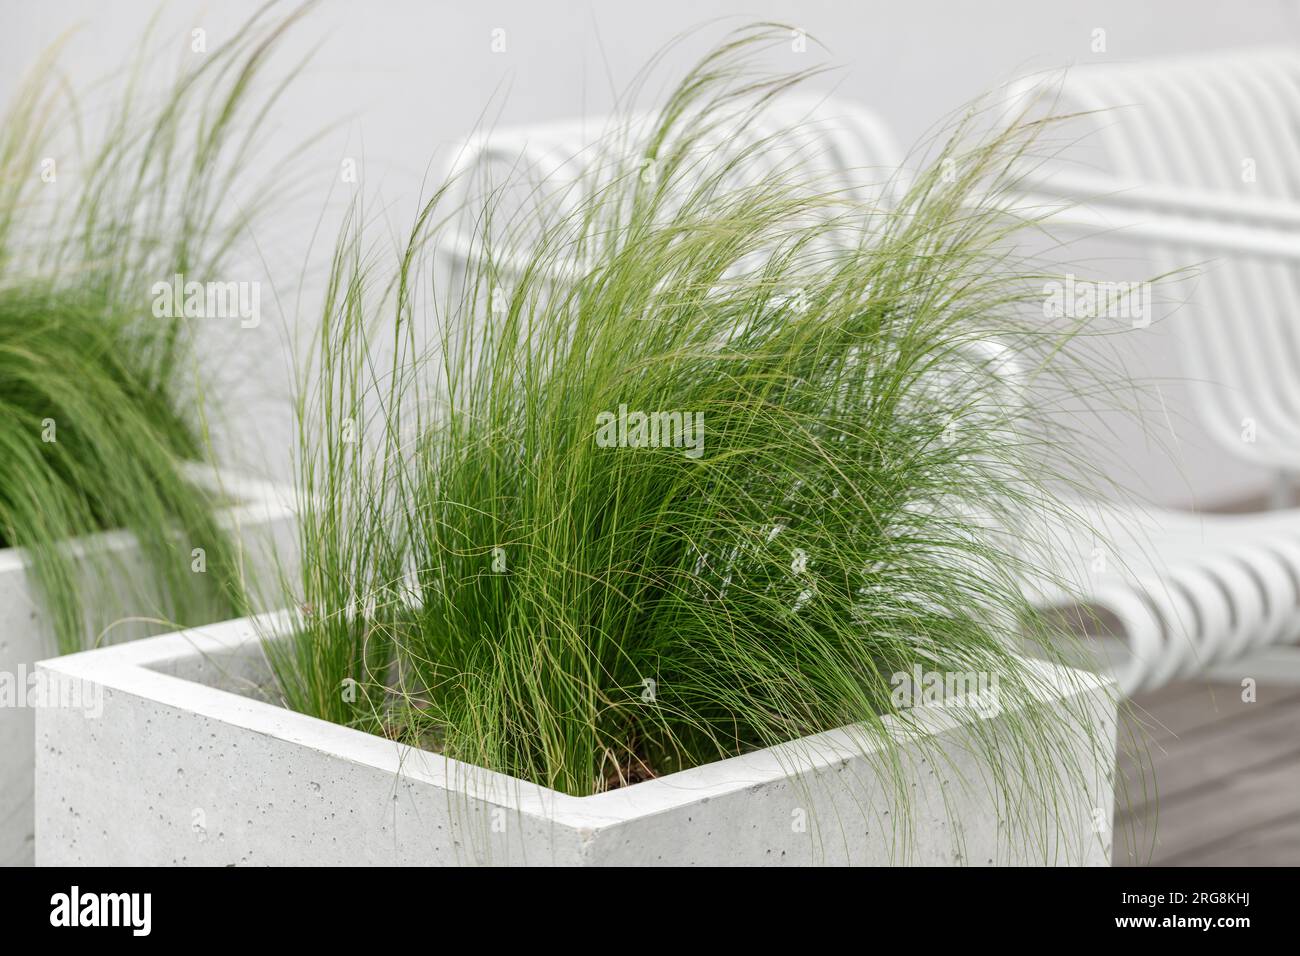 Light and elegant curves of feather grass (stipa)  in contemporary concrete flower pots. Summer terrace exterior concept. Feather grass found as ornam Stock Photo